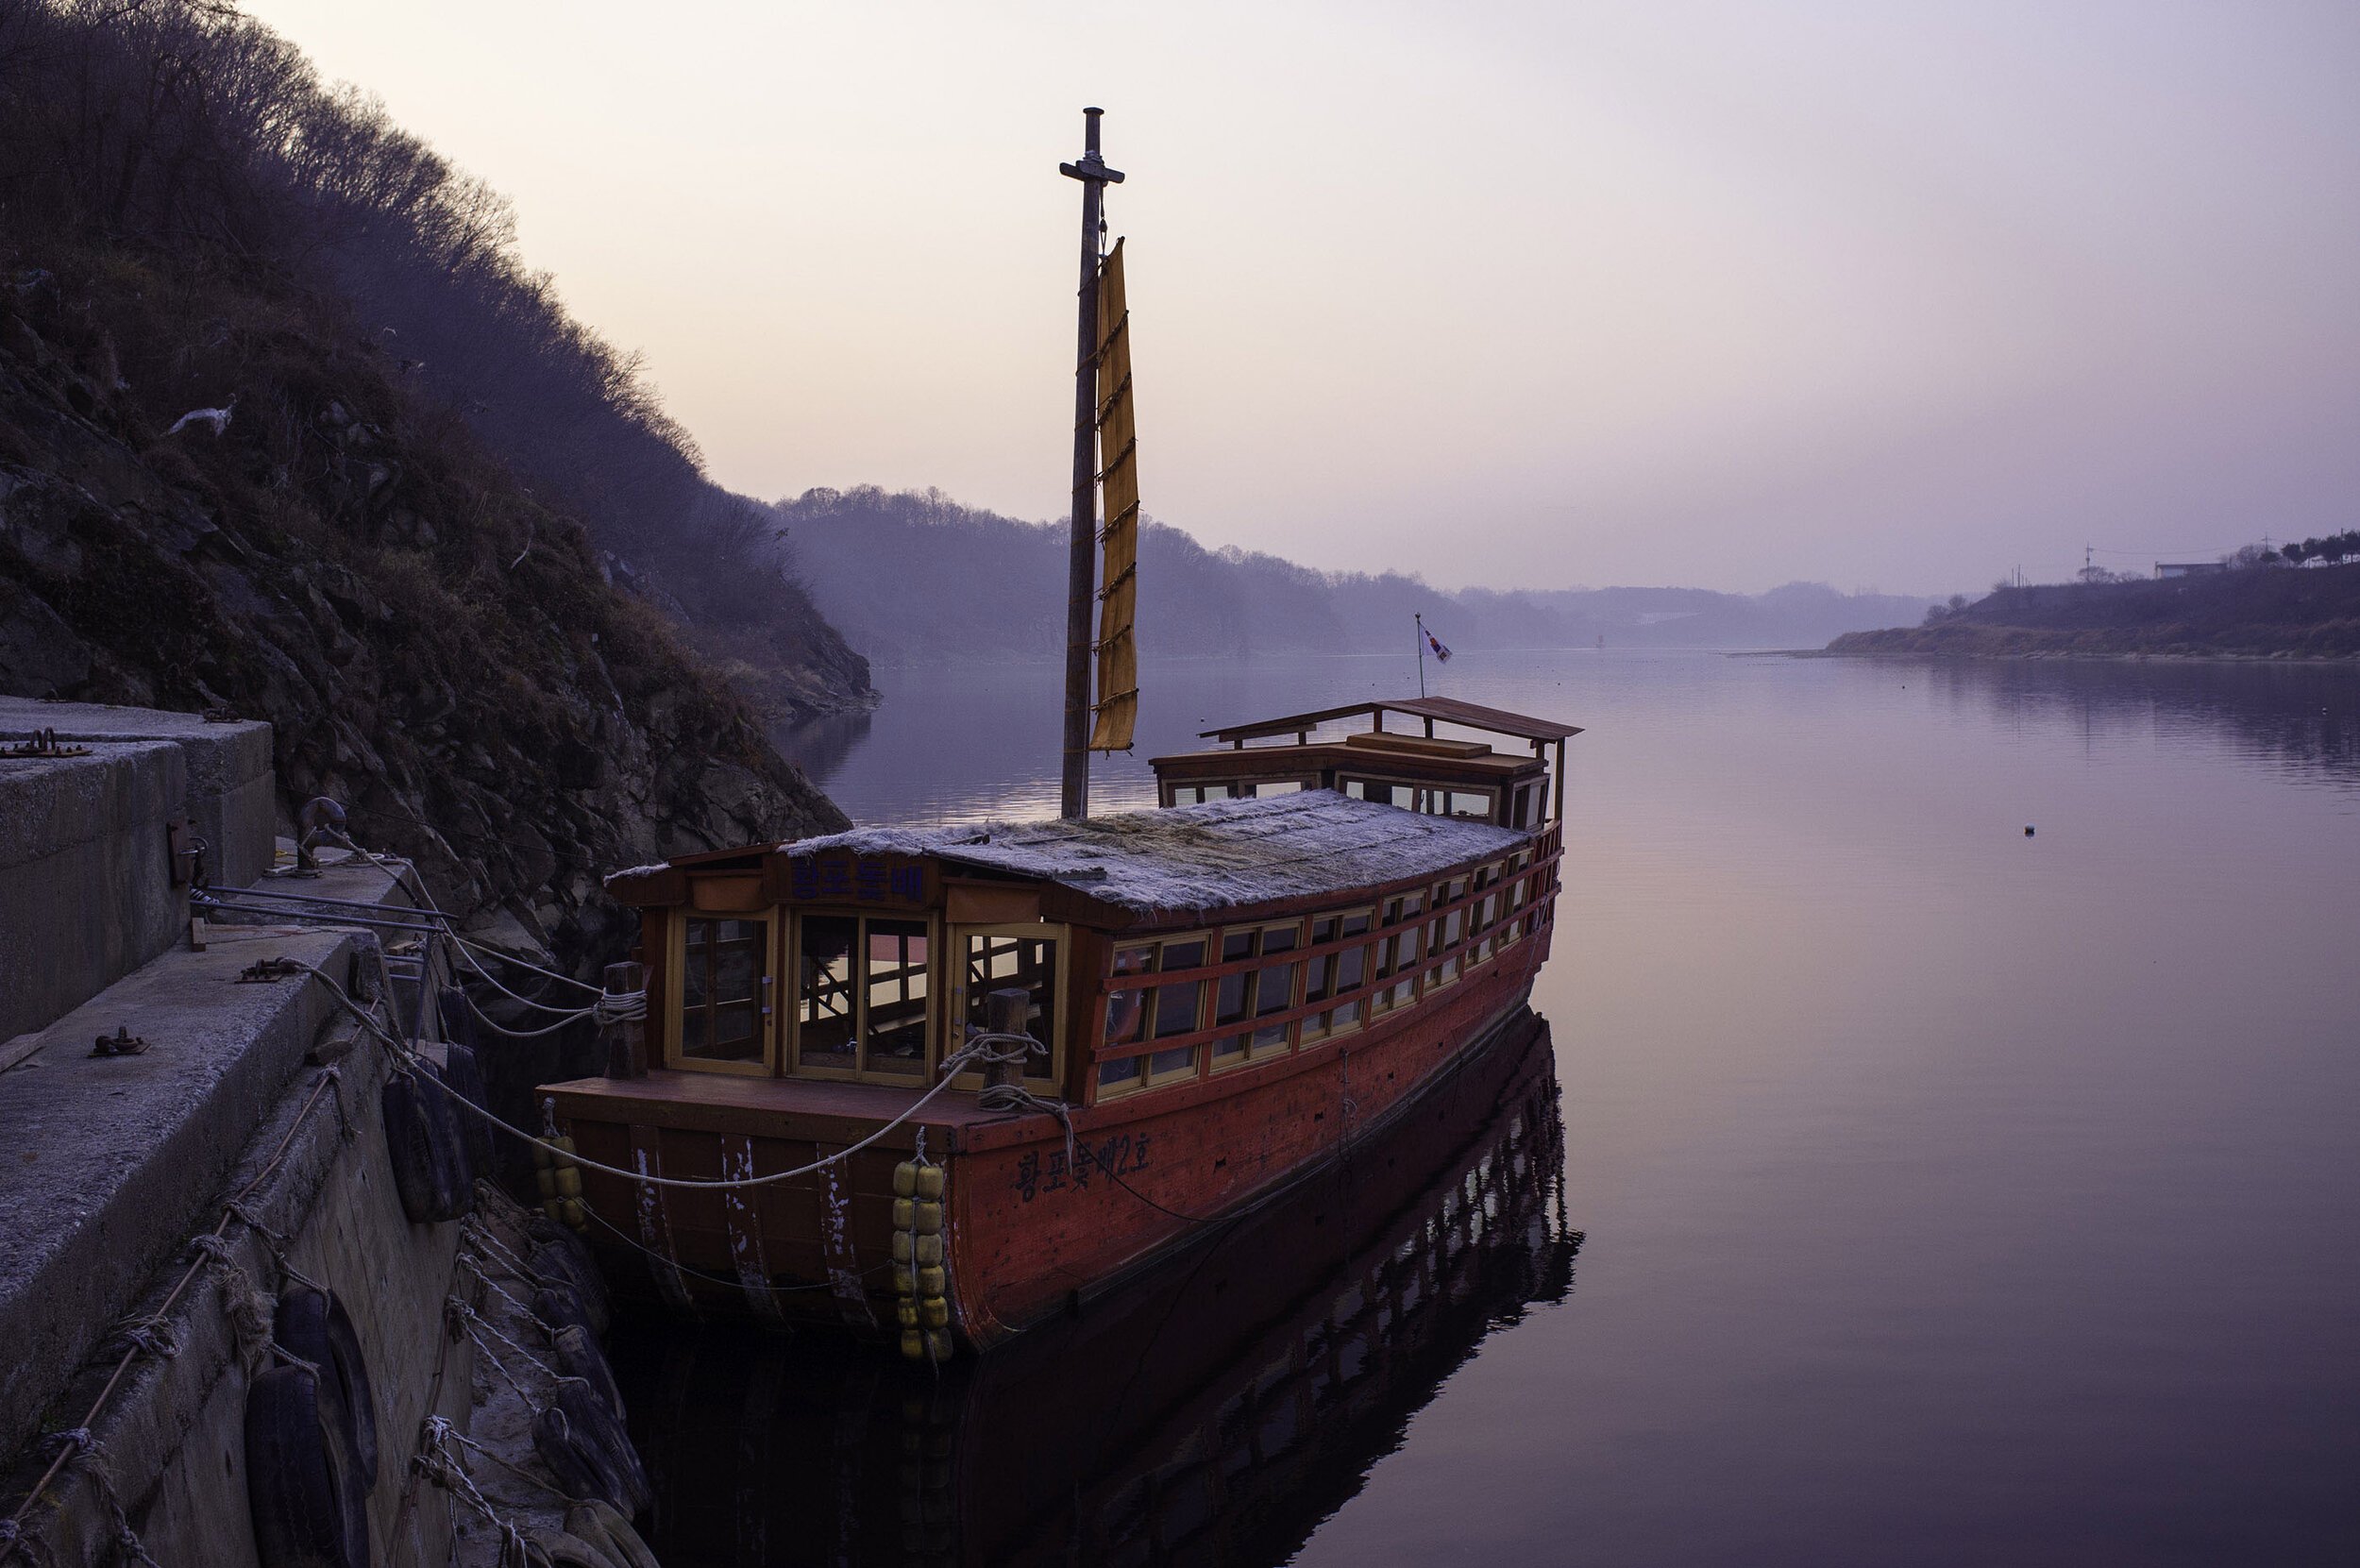 A_Tourboat_on_the_Imjin_River.jpg